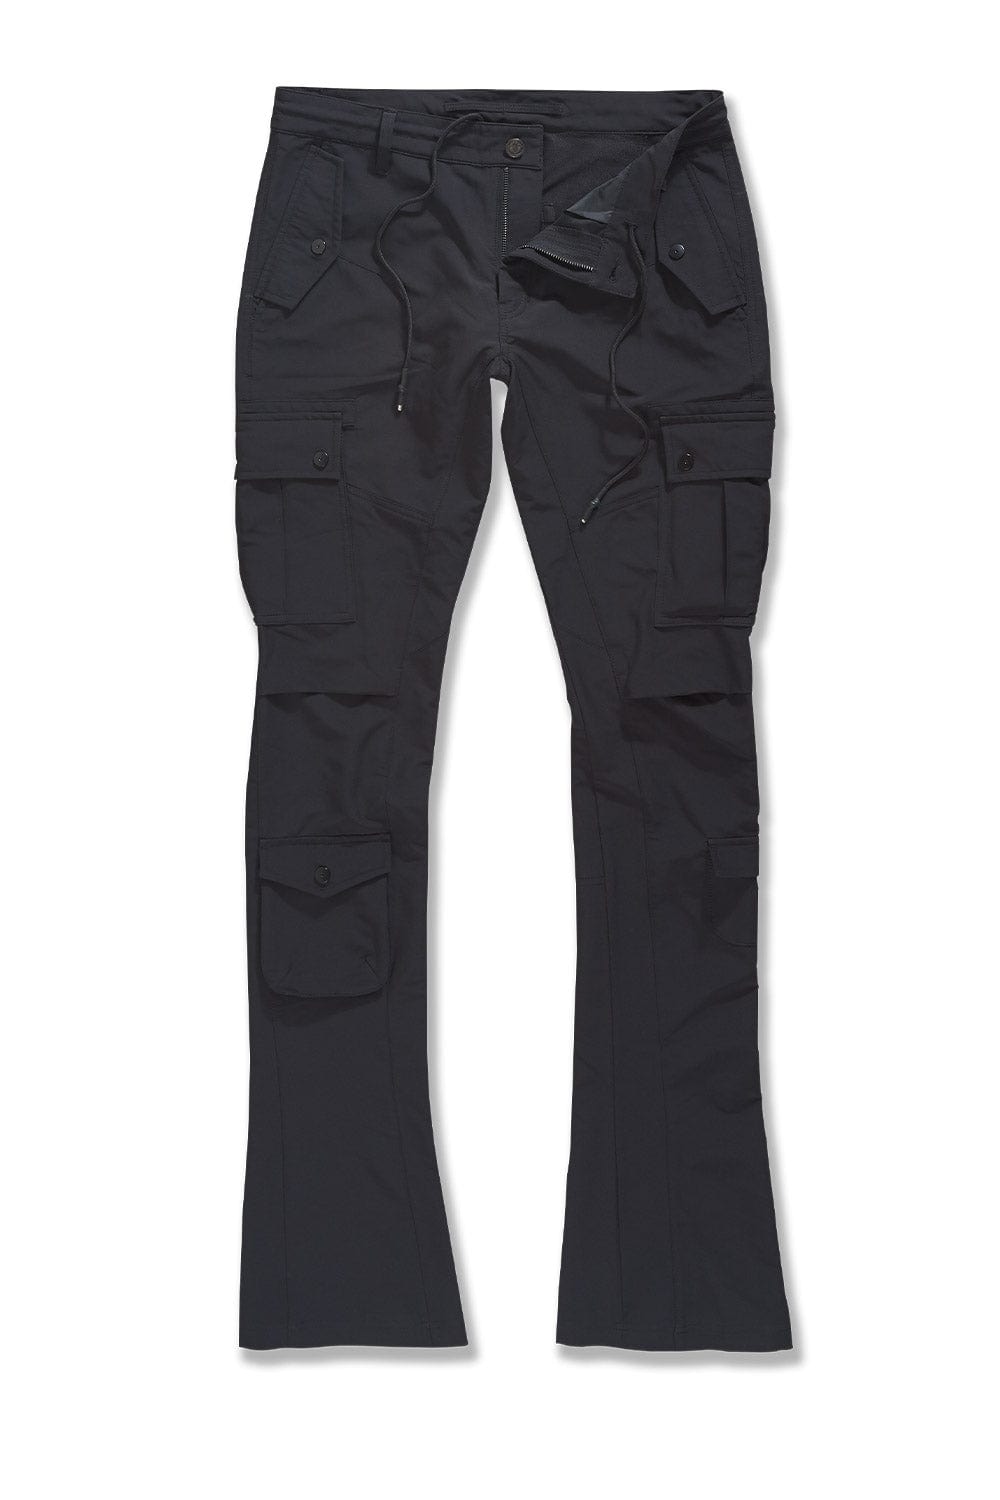 BB Martin Stacked - Rodeo Cargo Pants Black / 28